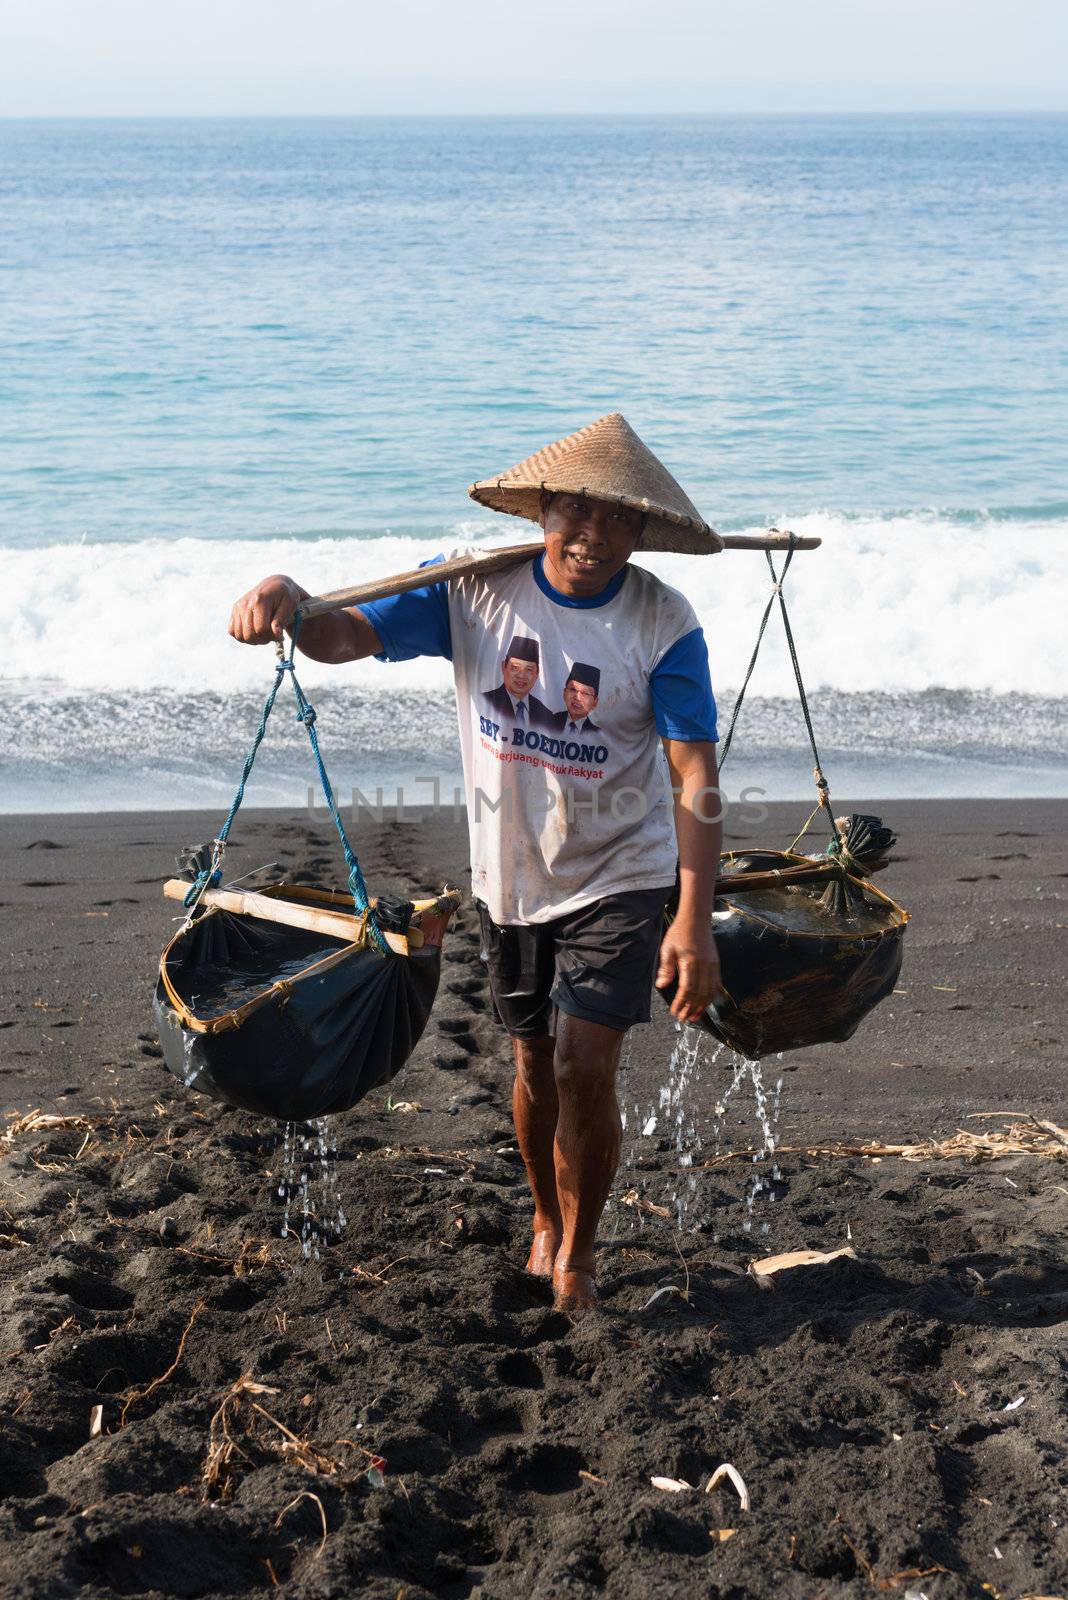 BALI, INDONESIA - SEP 26: Worker collects water for sea salt production on Sep 26, 2012 in Amuk Bay, Bali, Indonesia. It is unique tradition of salt production on volcanic black sand over 900 years. 